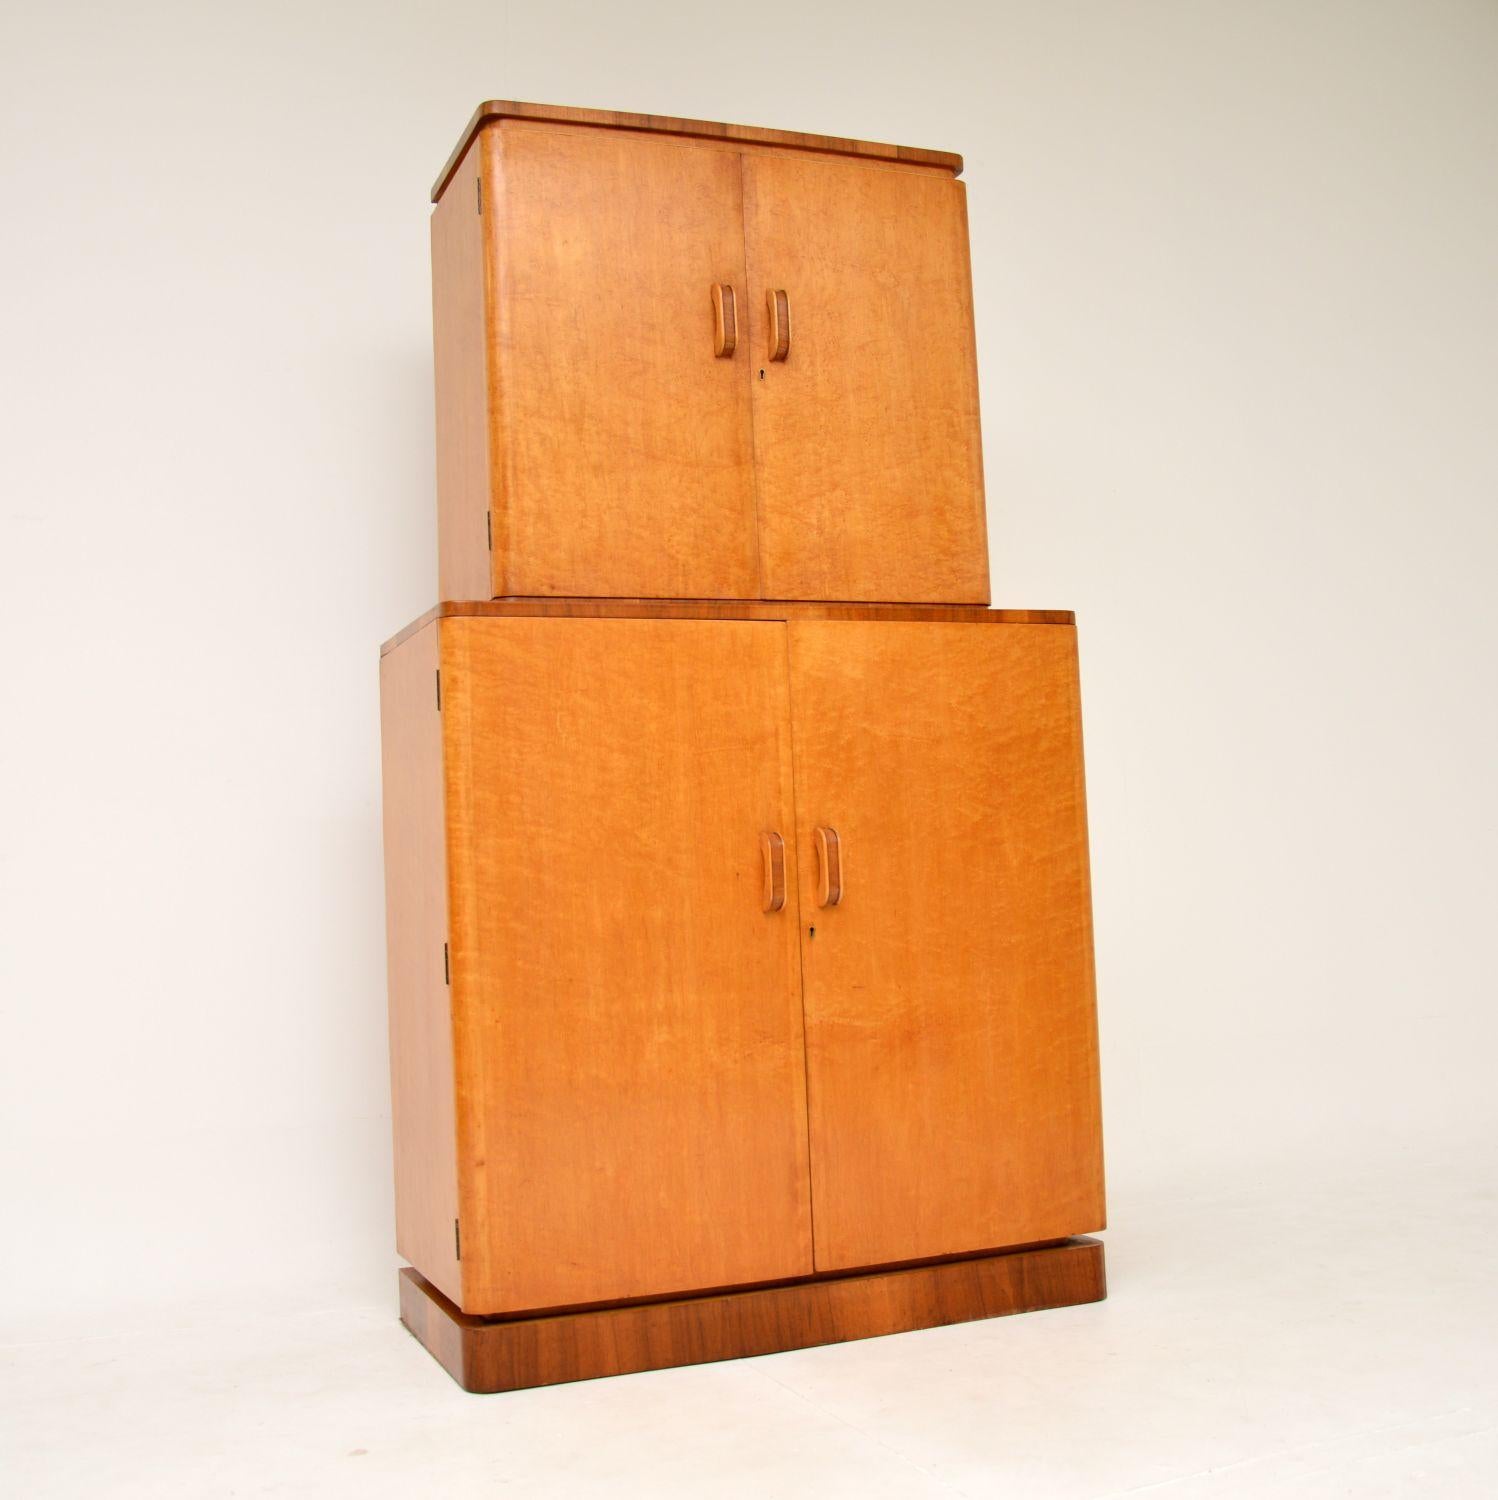 A superb original Art Deco period cocktail drinks cabinet in birds eye maple. This was made in England, it dates from the 1930’s.

The quality is amazing, the birds eye maple has a gorgeous blonde colour tone, with contrasting darker walnut